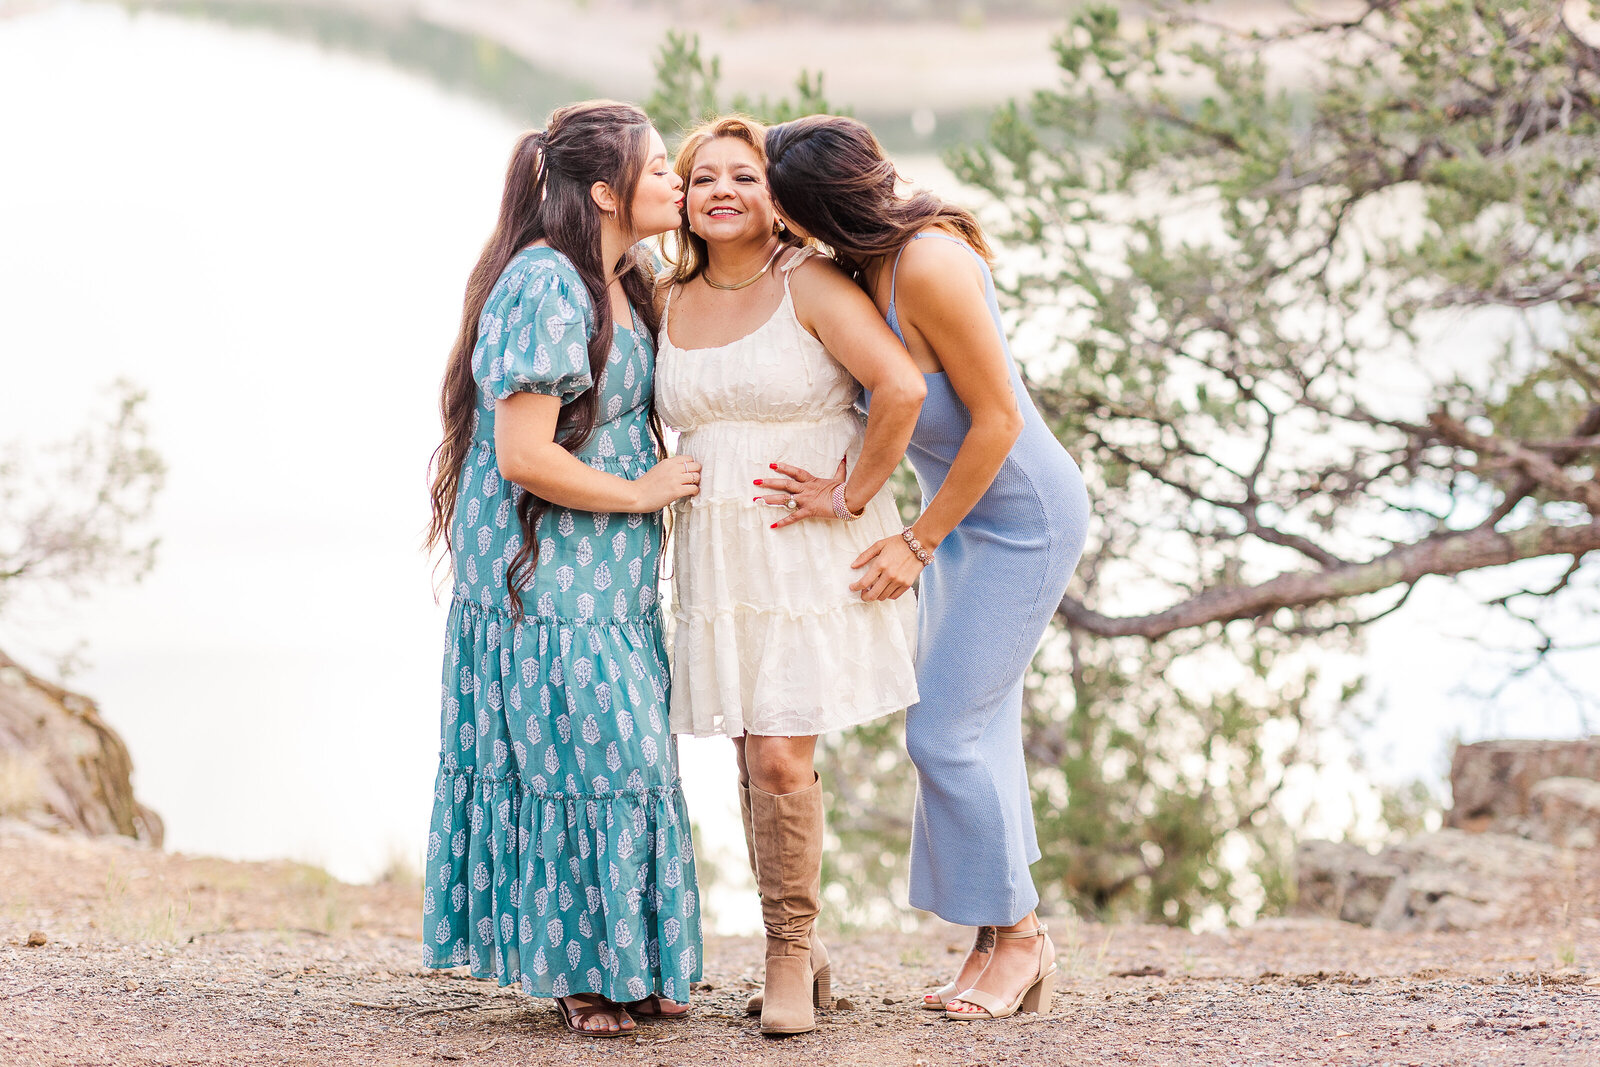 Daughters kiss mom on the cheek